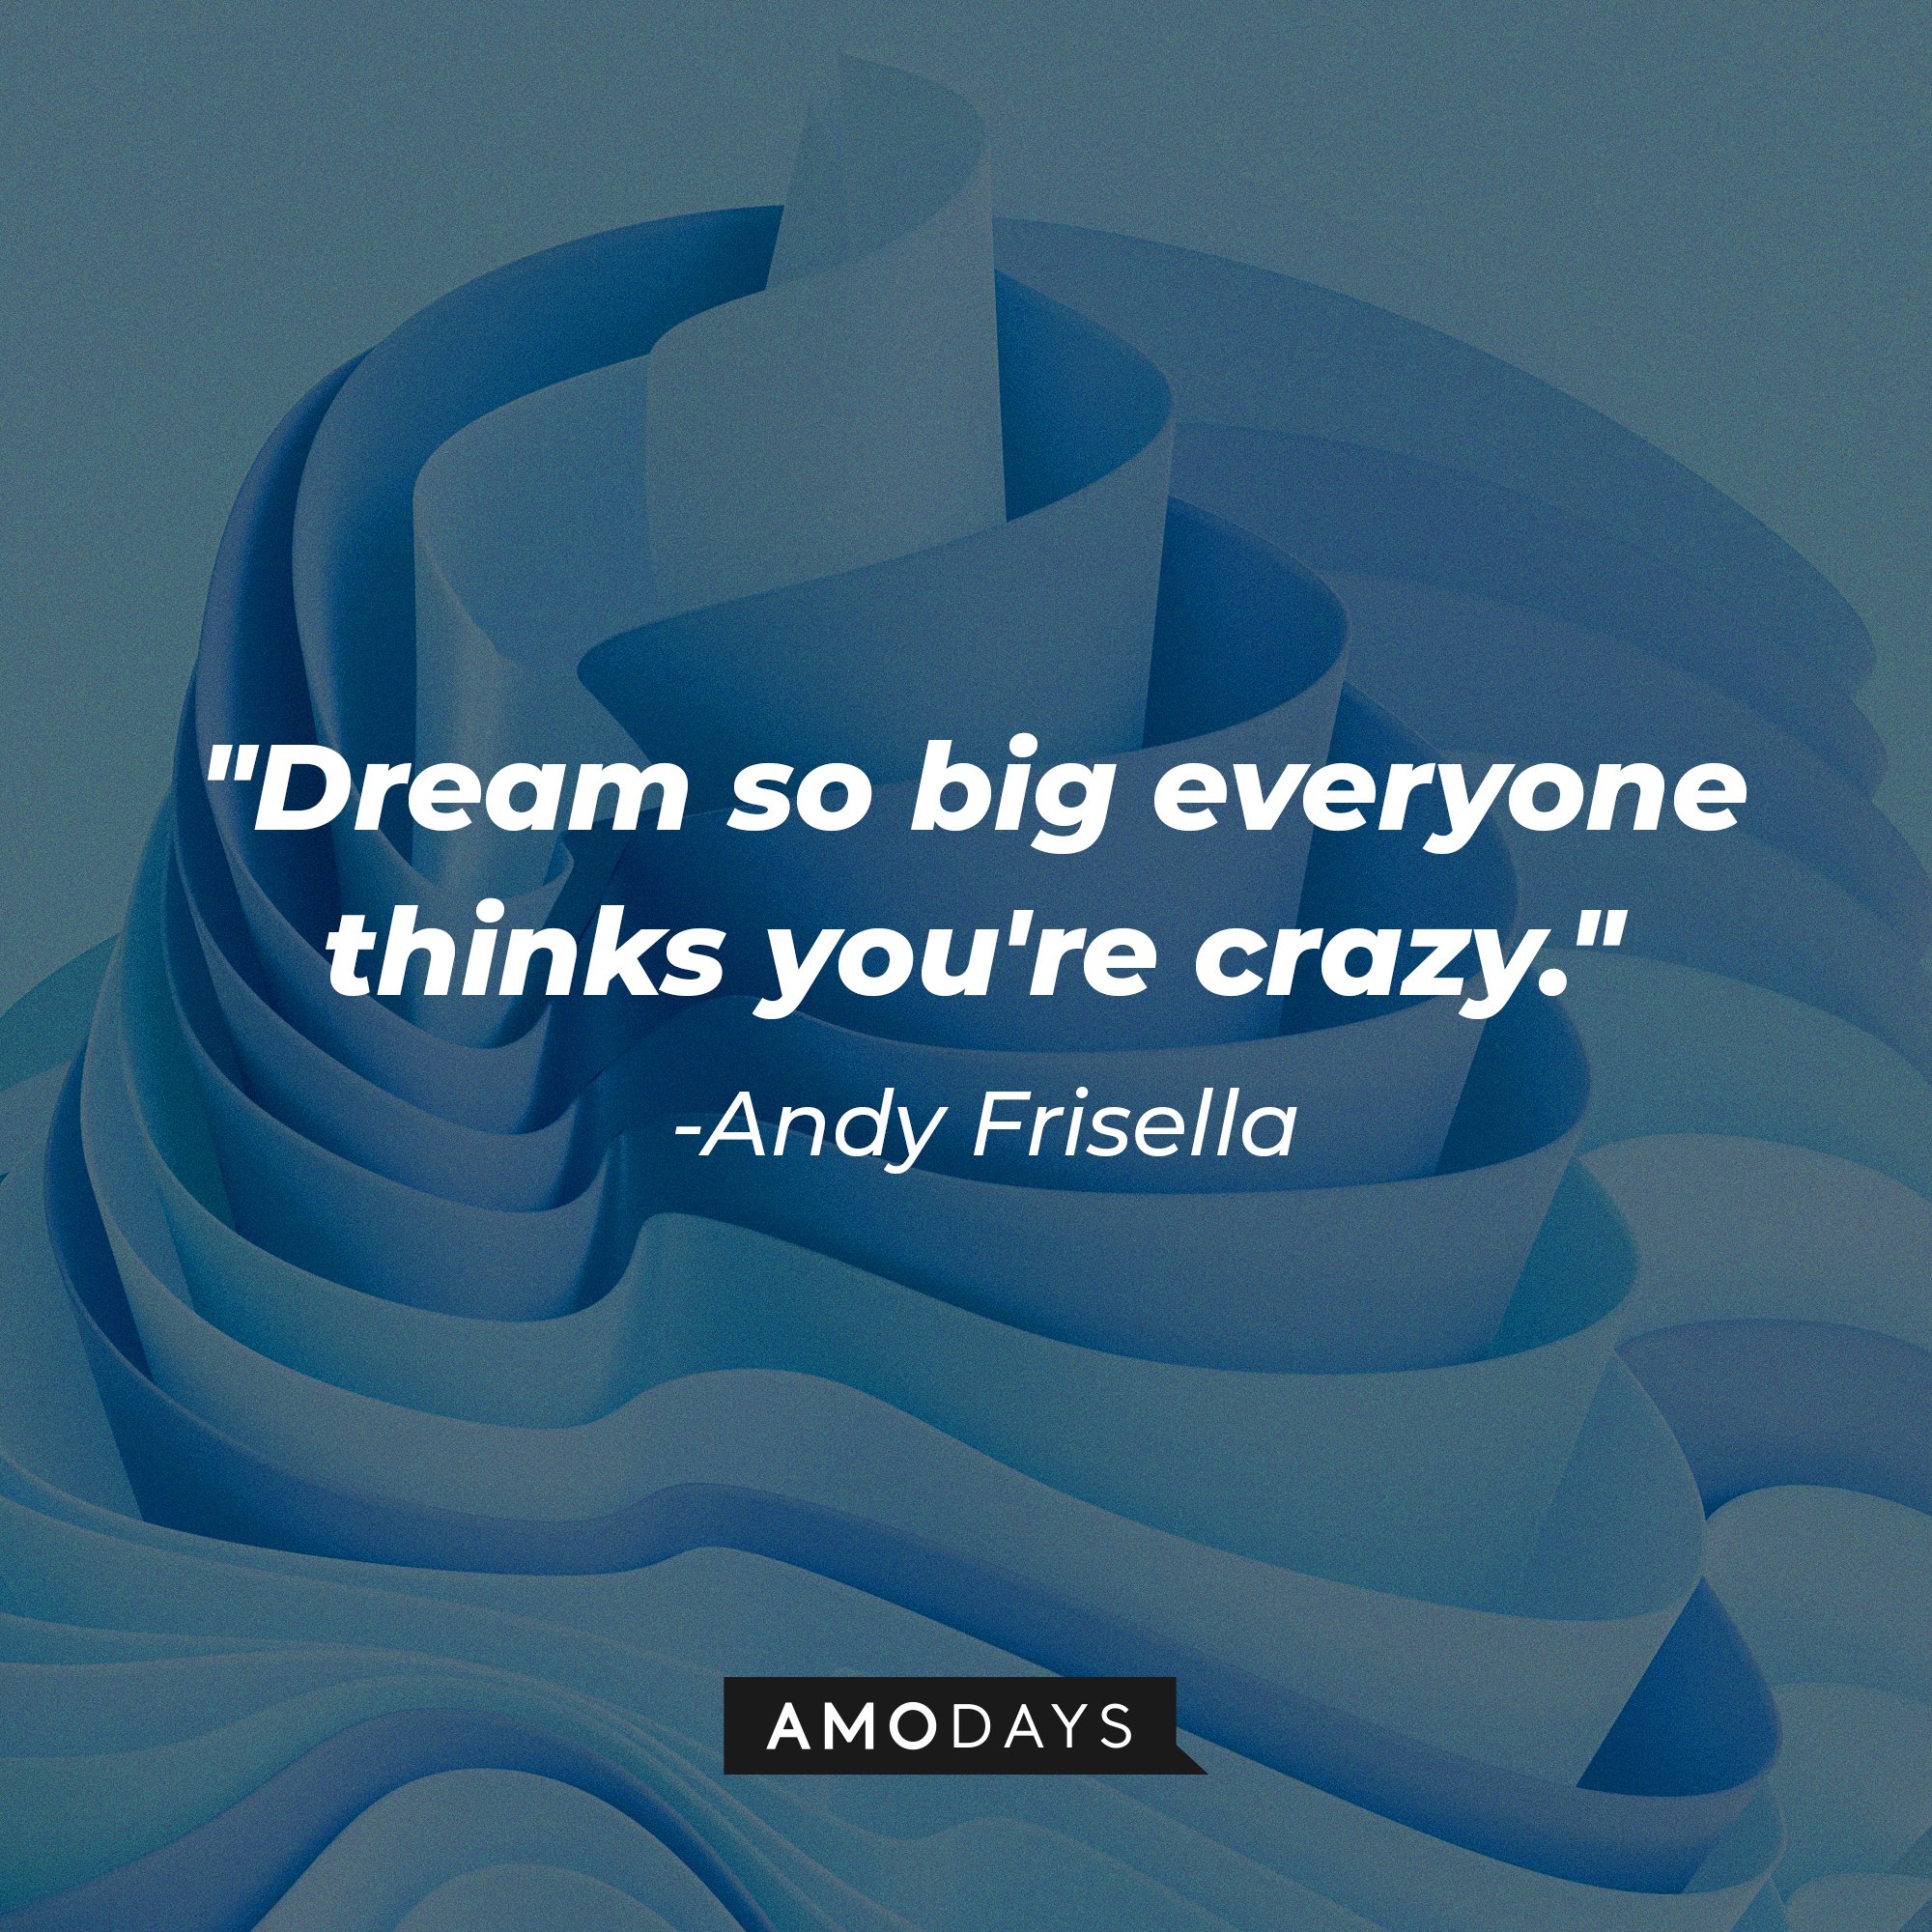 Andy Frisella's quote: "Dream so big everyone thinks you're crazy." | Image: AmoDays